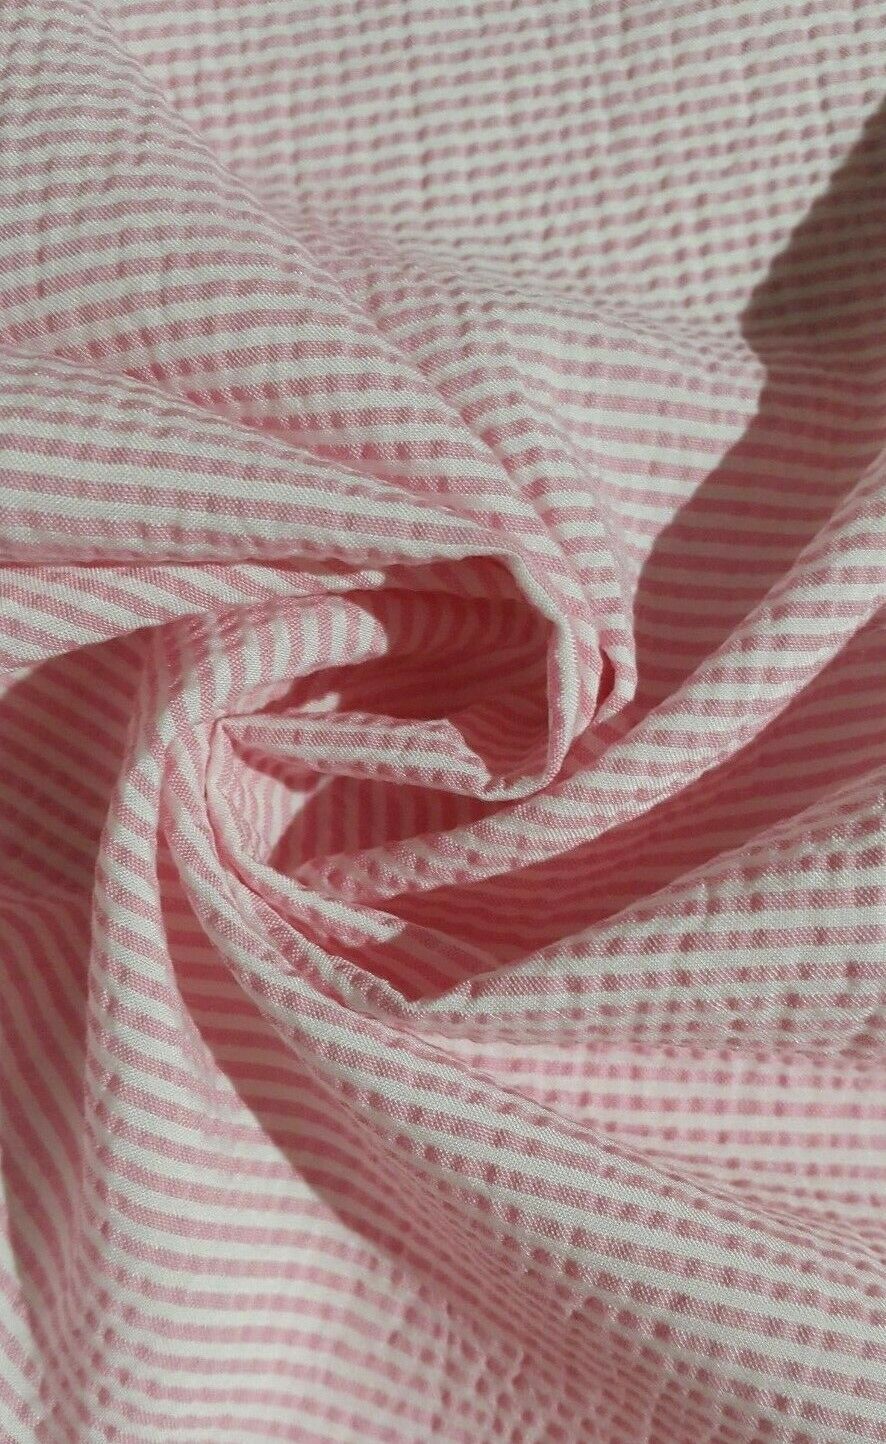 2.20 METRES WAVY EFFECT AND STRIPED POLYCOTTON FABRIC - SOLD BY 2.20 METRES